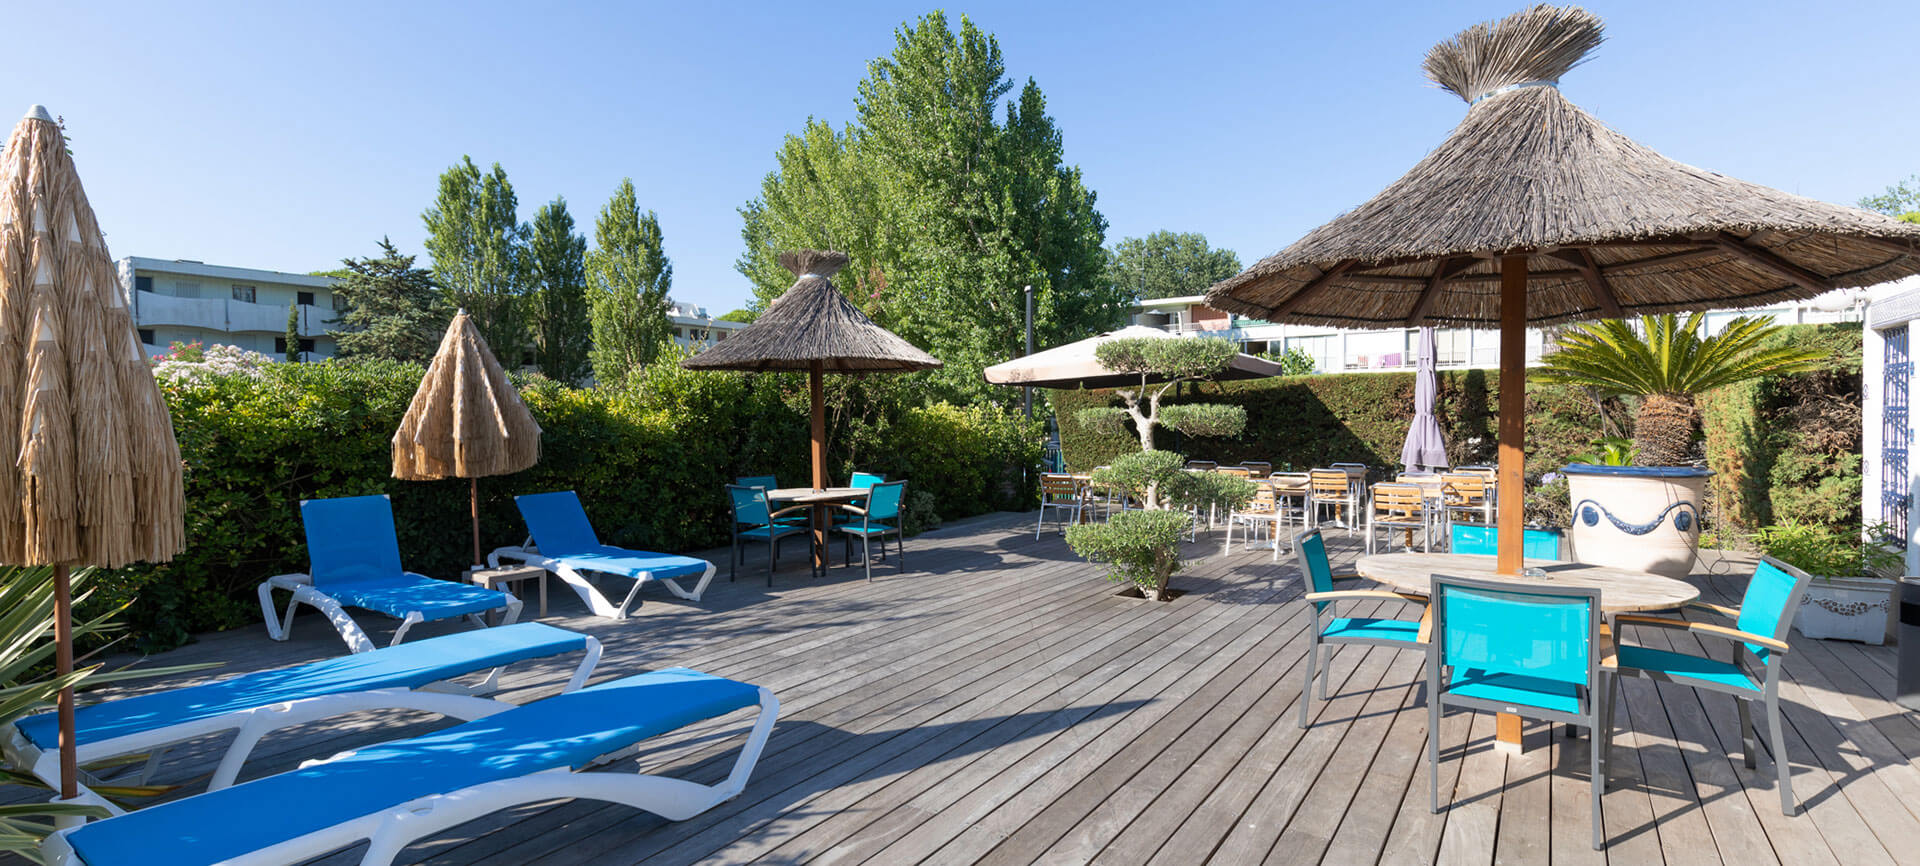 A large terrace and deckchairs to relax at the Hotel Europe near Montpellier